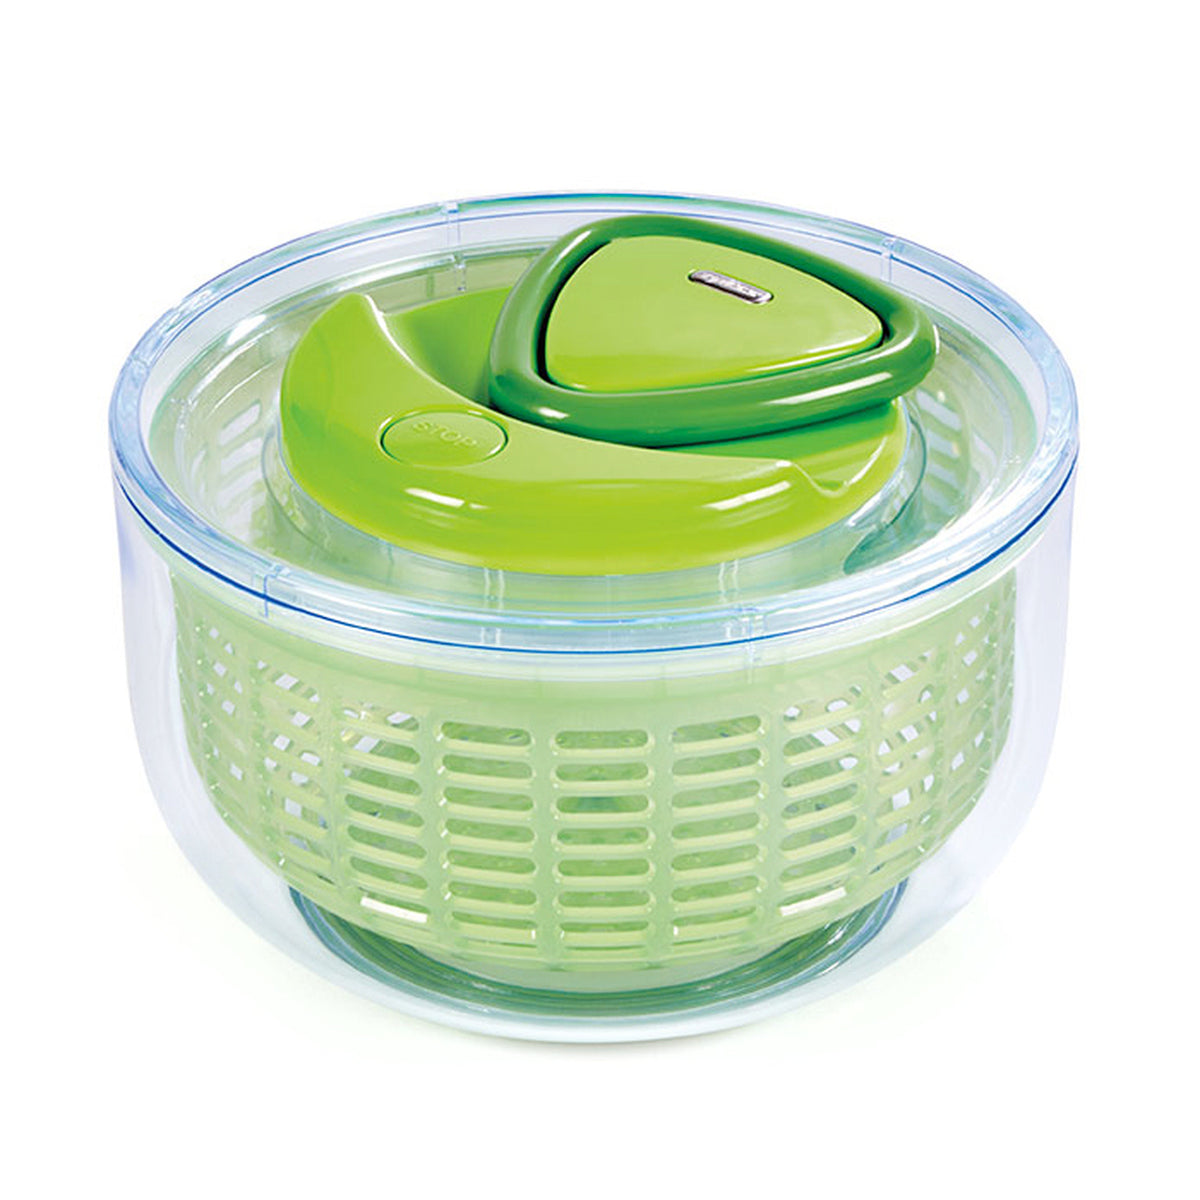 Zyliss Easy Spin 2 Stainless Steel Salad Spinner – Zyliss Kitchen